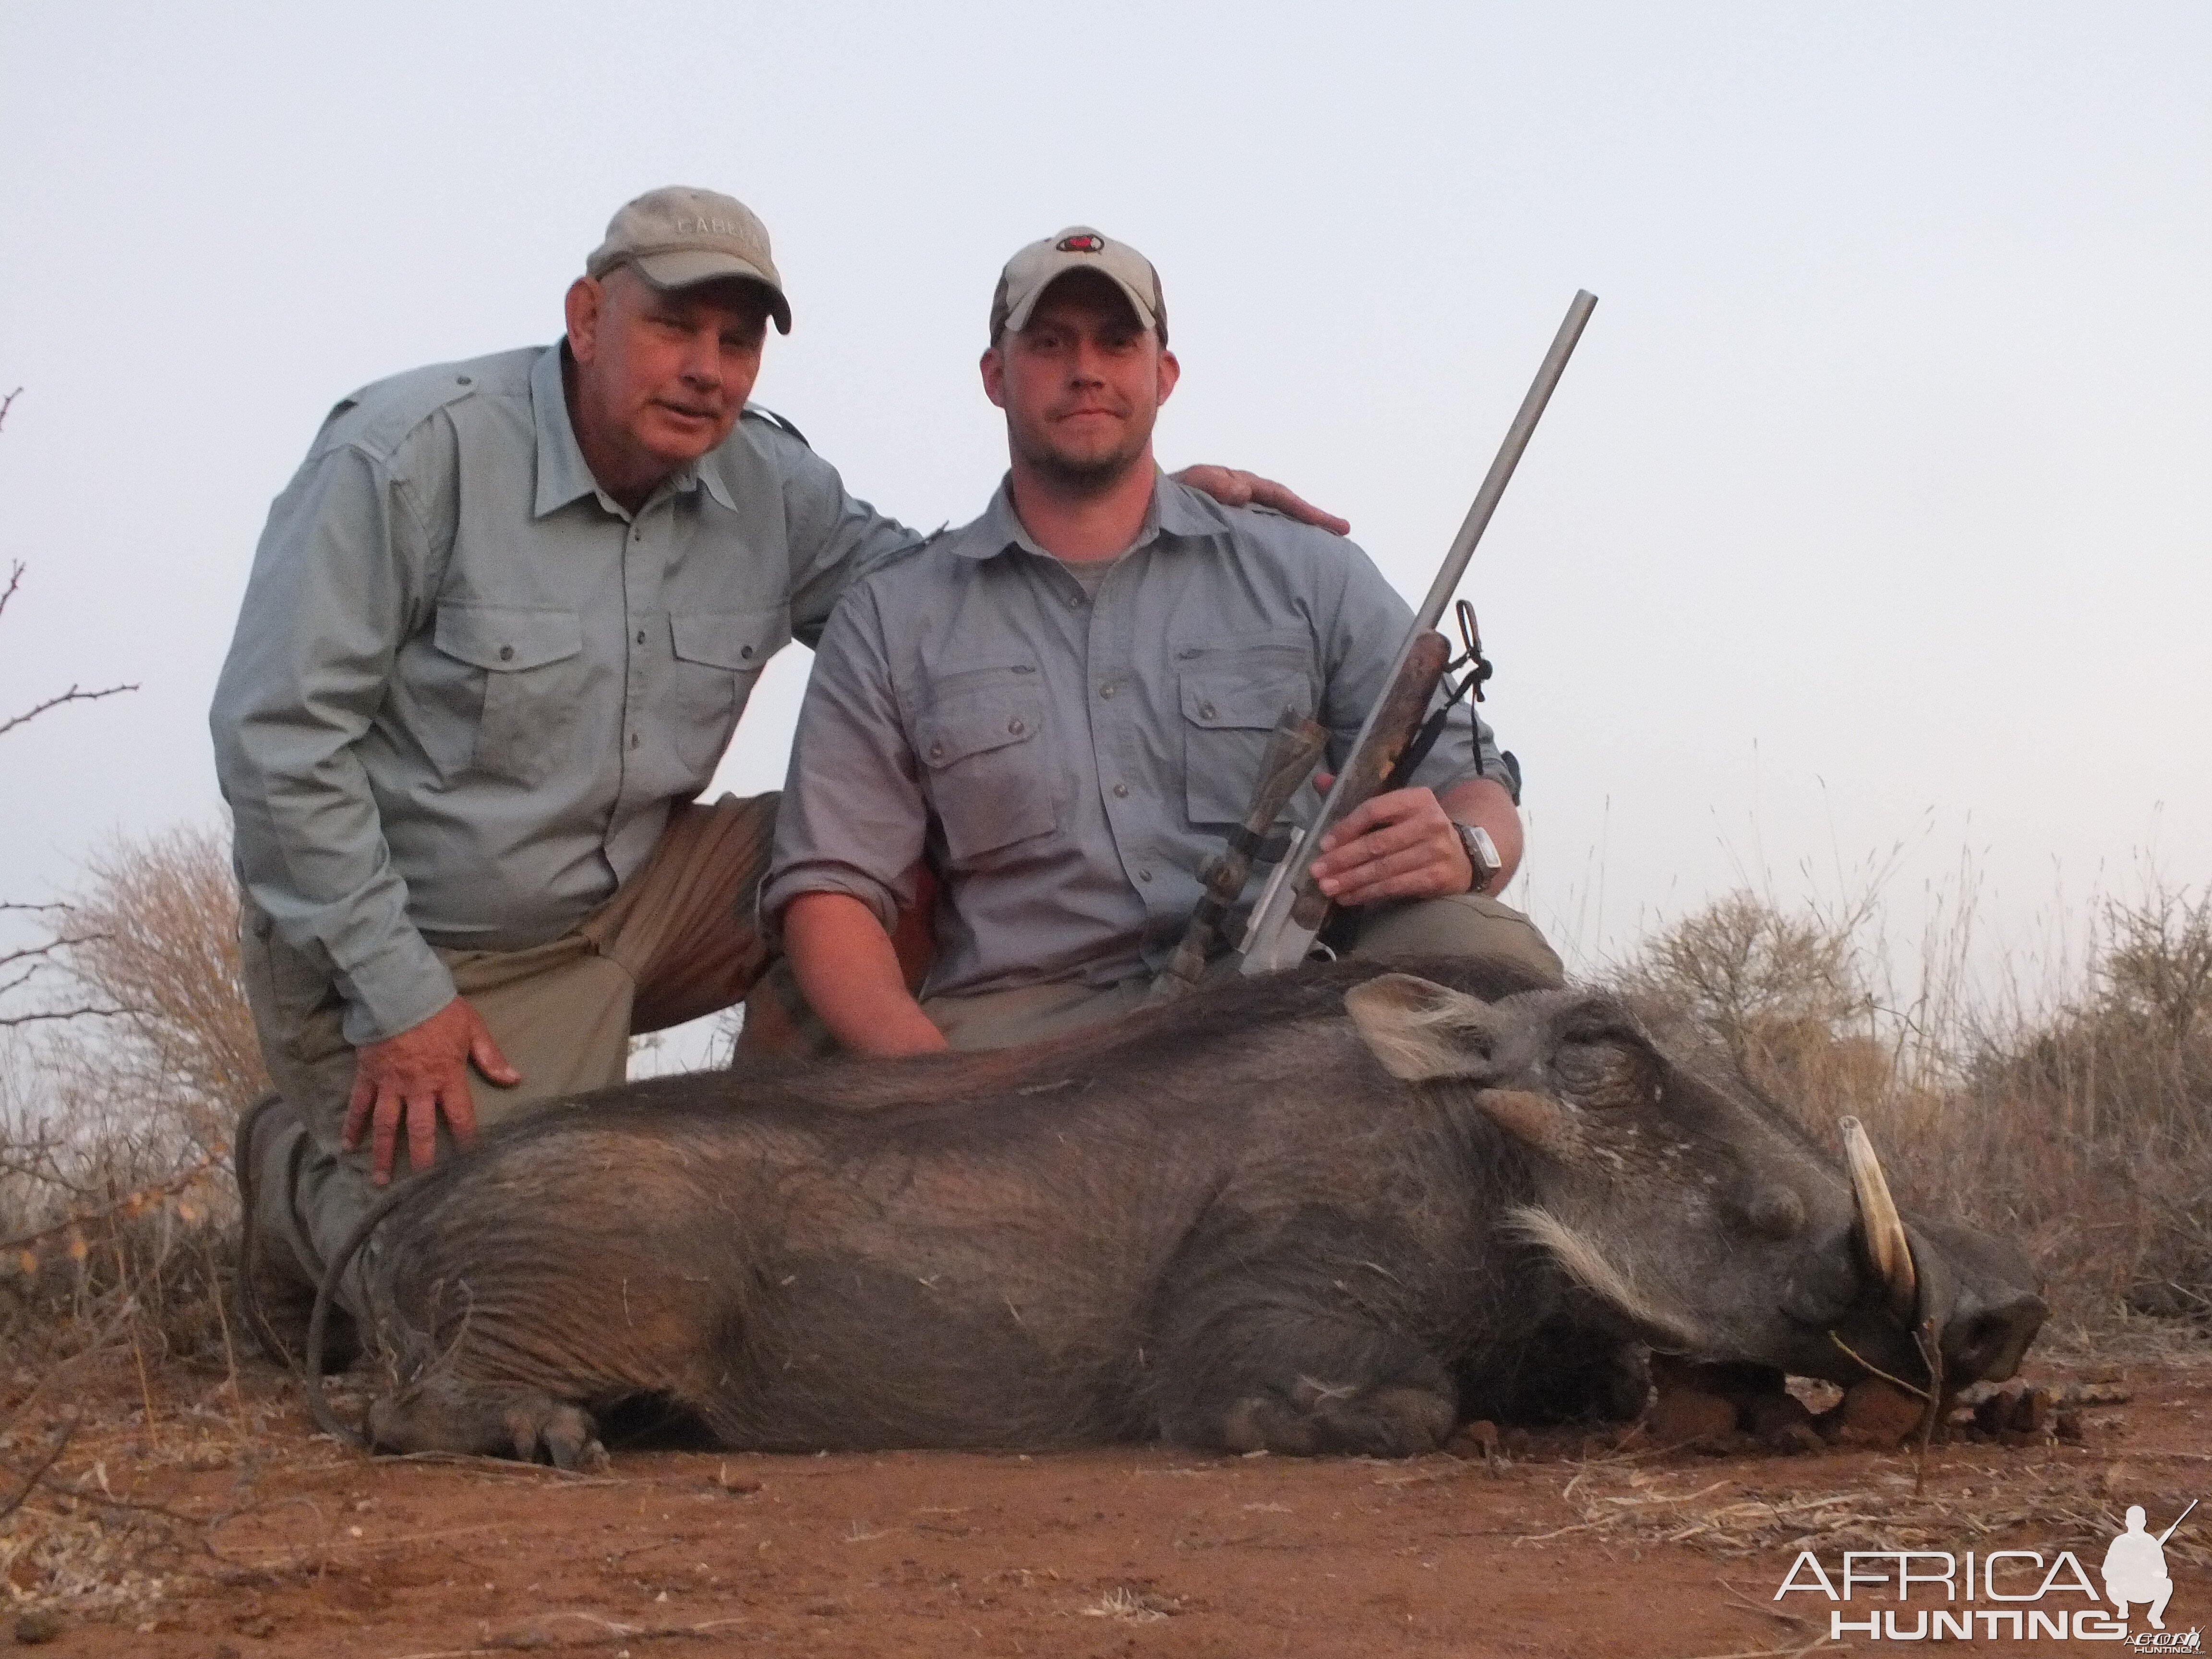 Me and Dad with my warthog